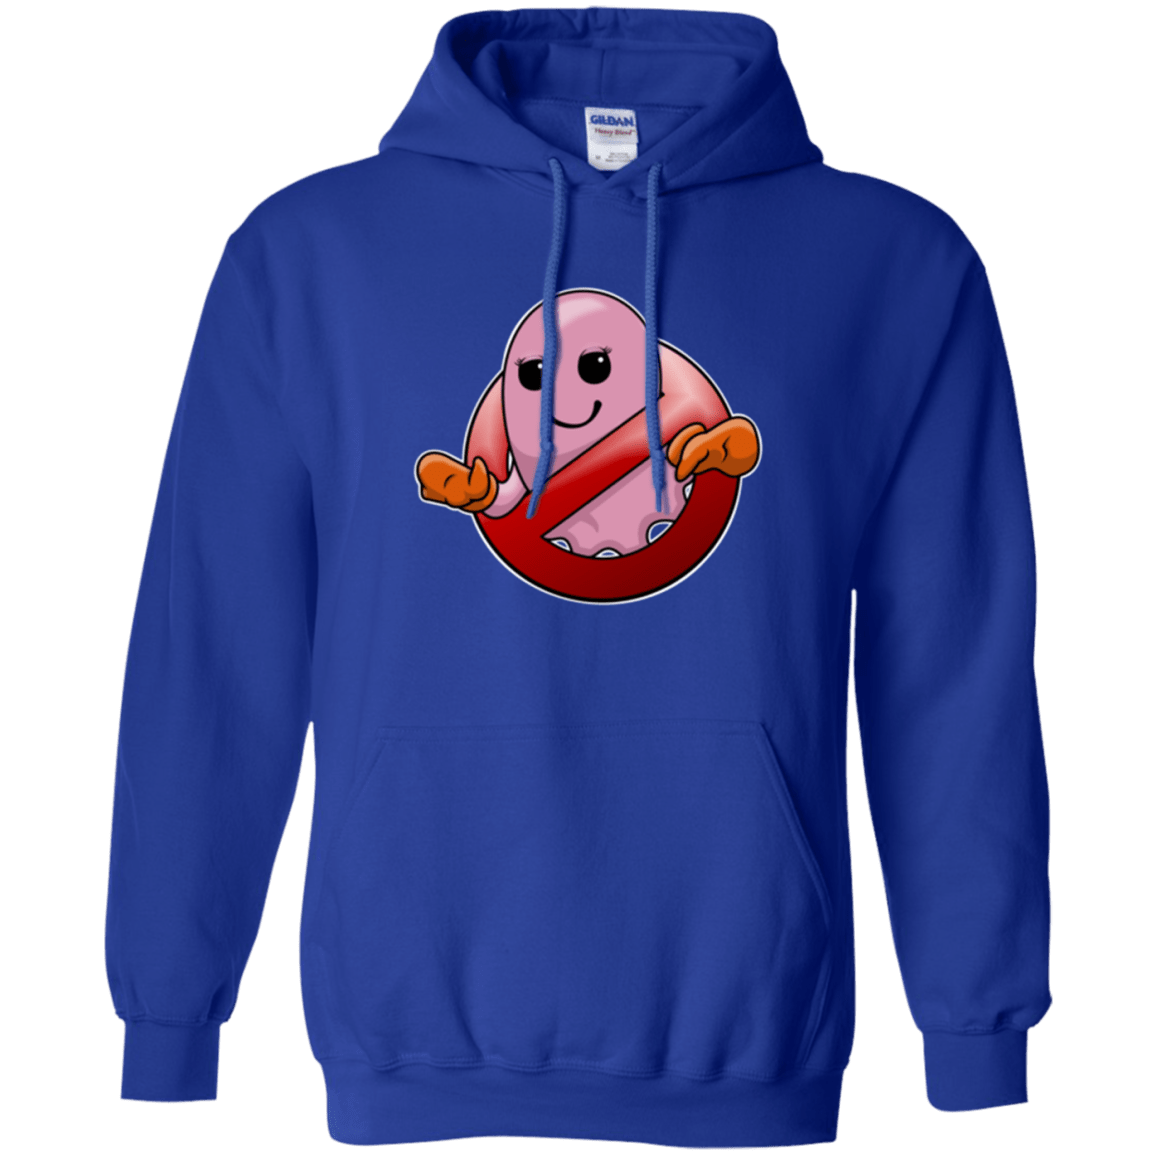 Sweatshirts Royal / Small Pinky Buster Pullover Hoodie